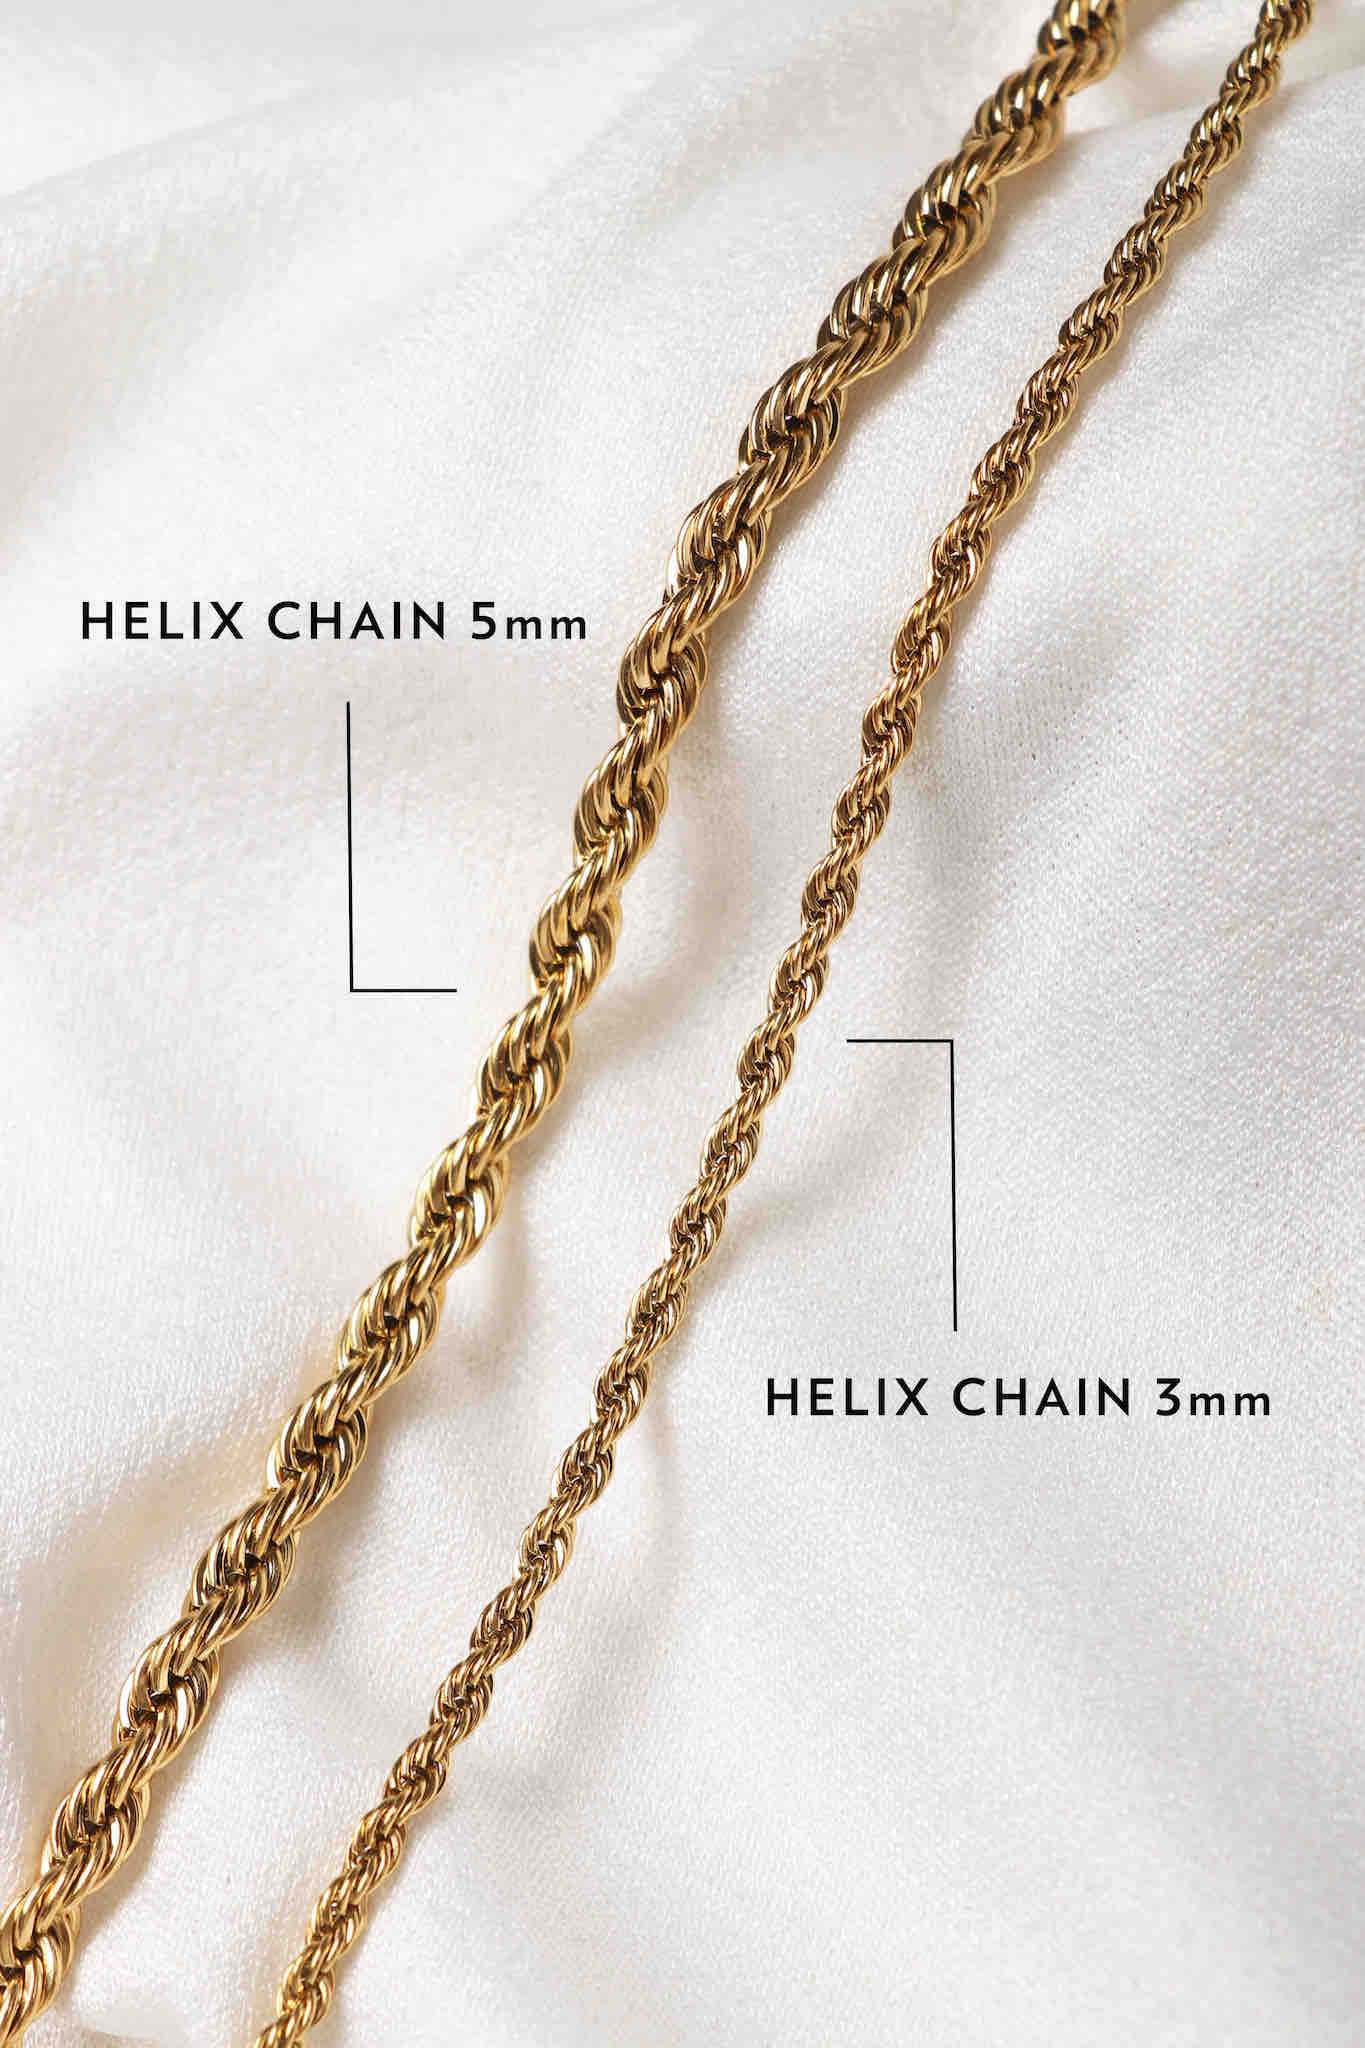 Up close size comparison of Helix Chain 5mm vs Helix Chain 3mm